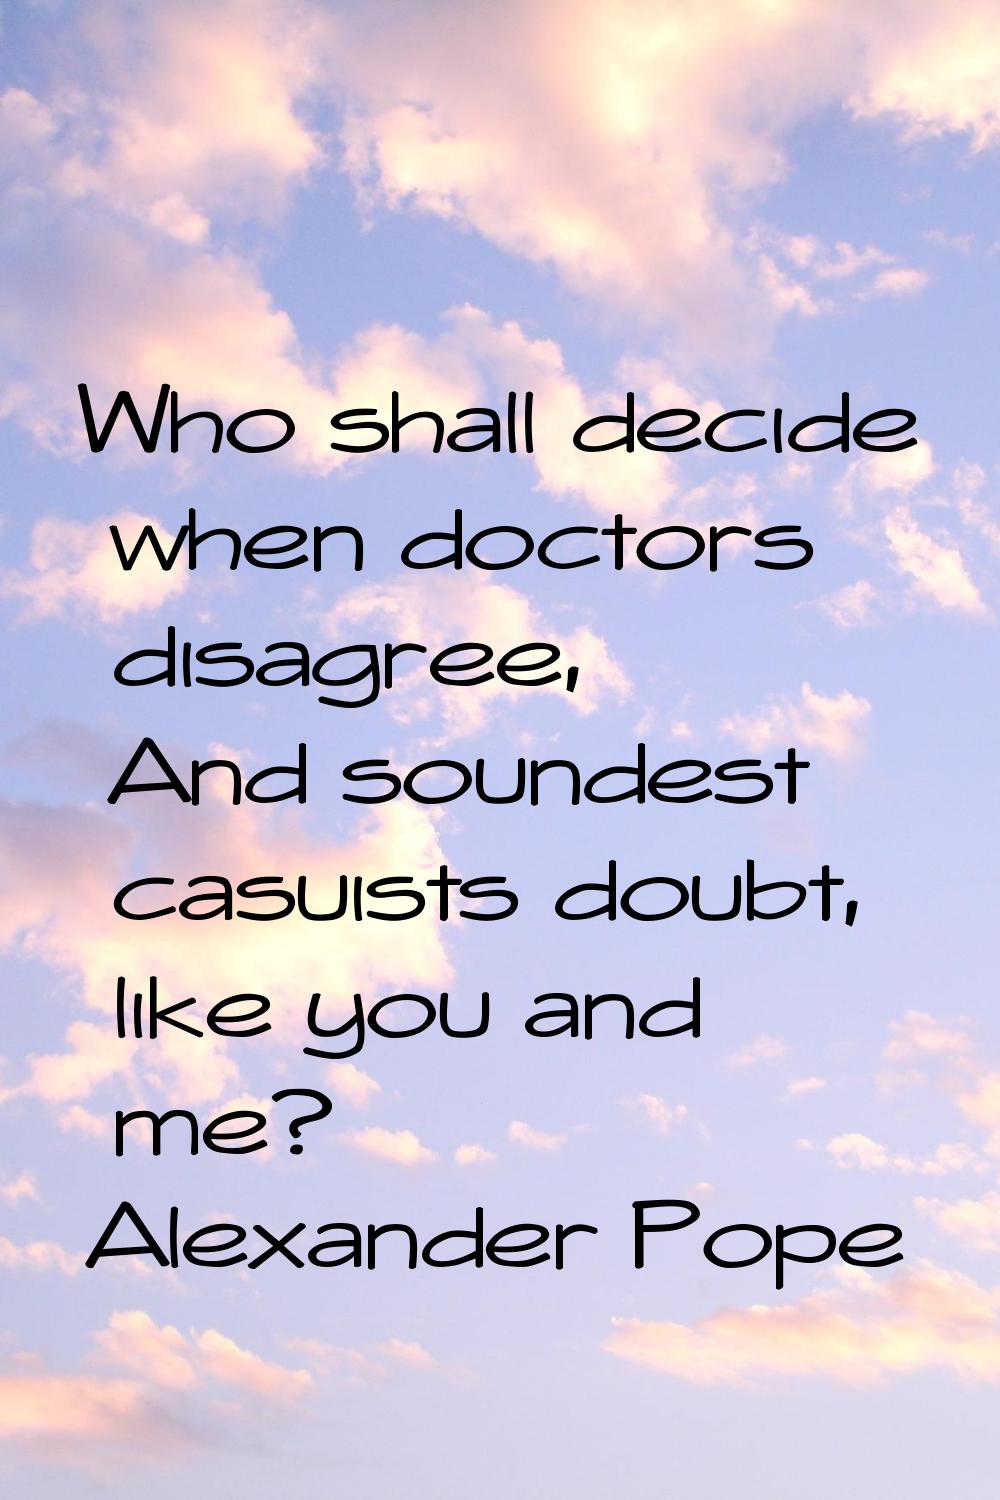 Who shall decide when doctors disagree, And soundest casuists doubt, like you and me?